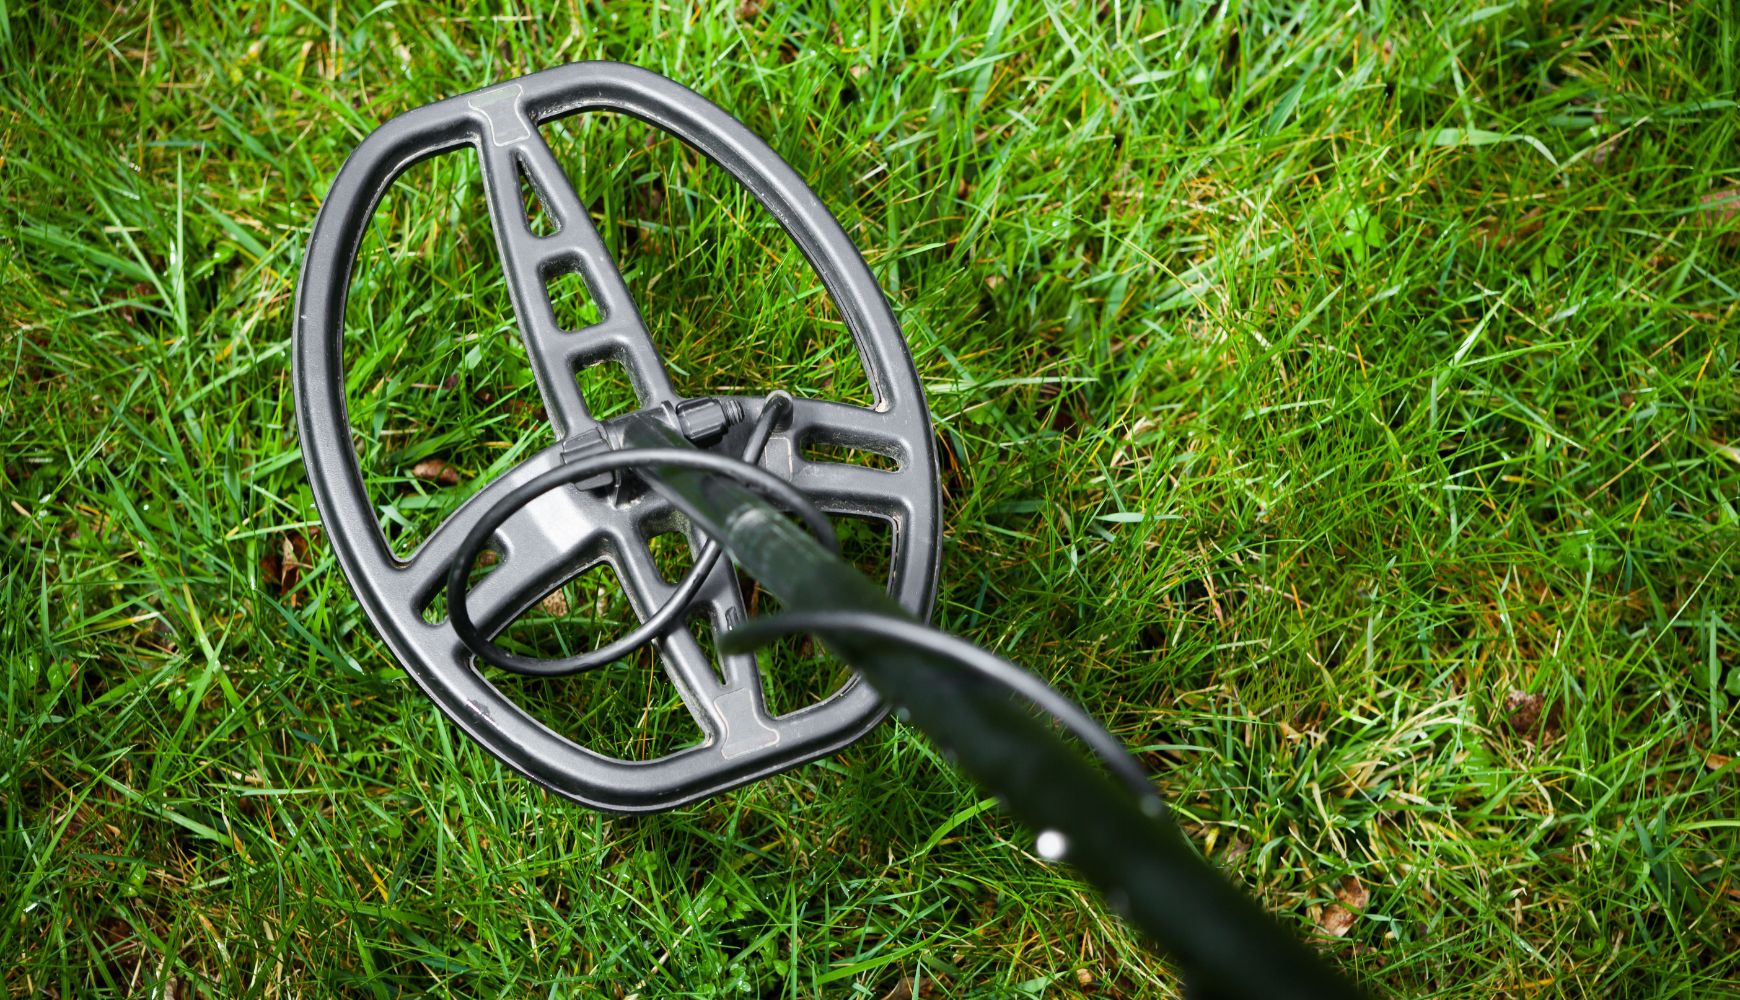 5 Things To Know Before Buying a Metal Detector